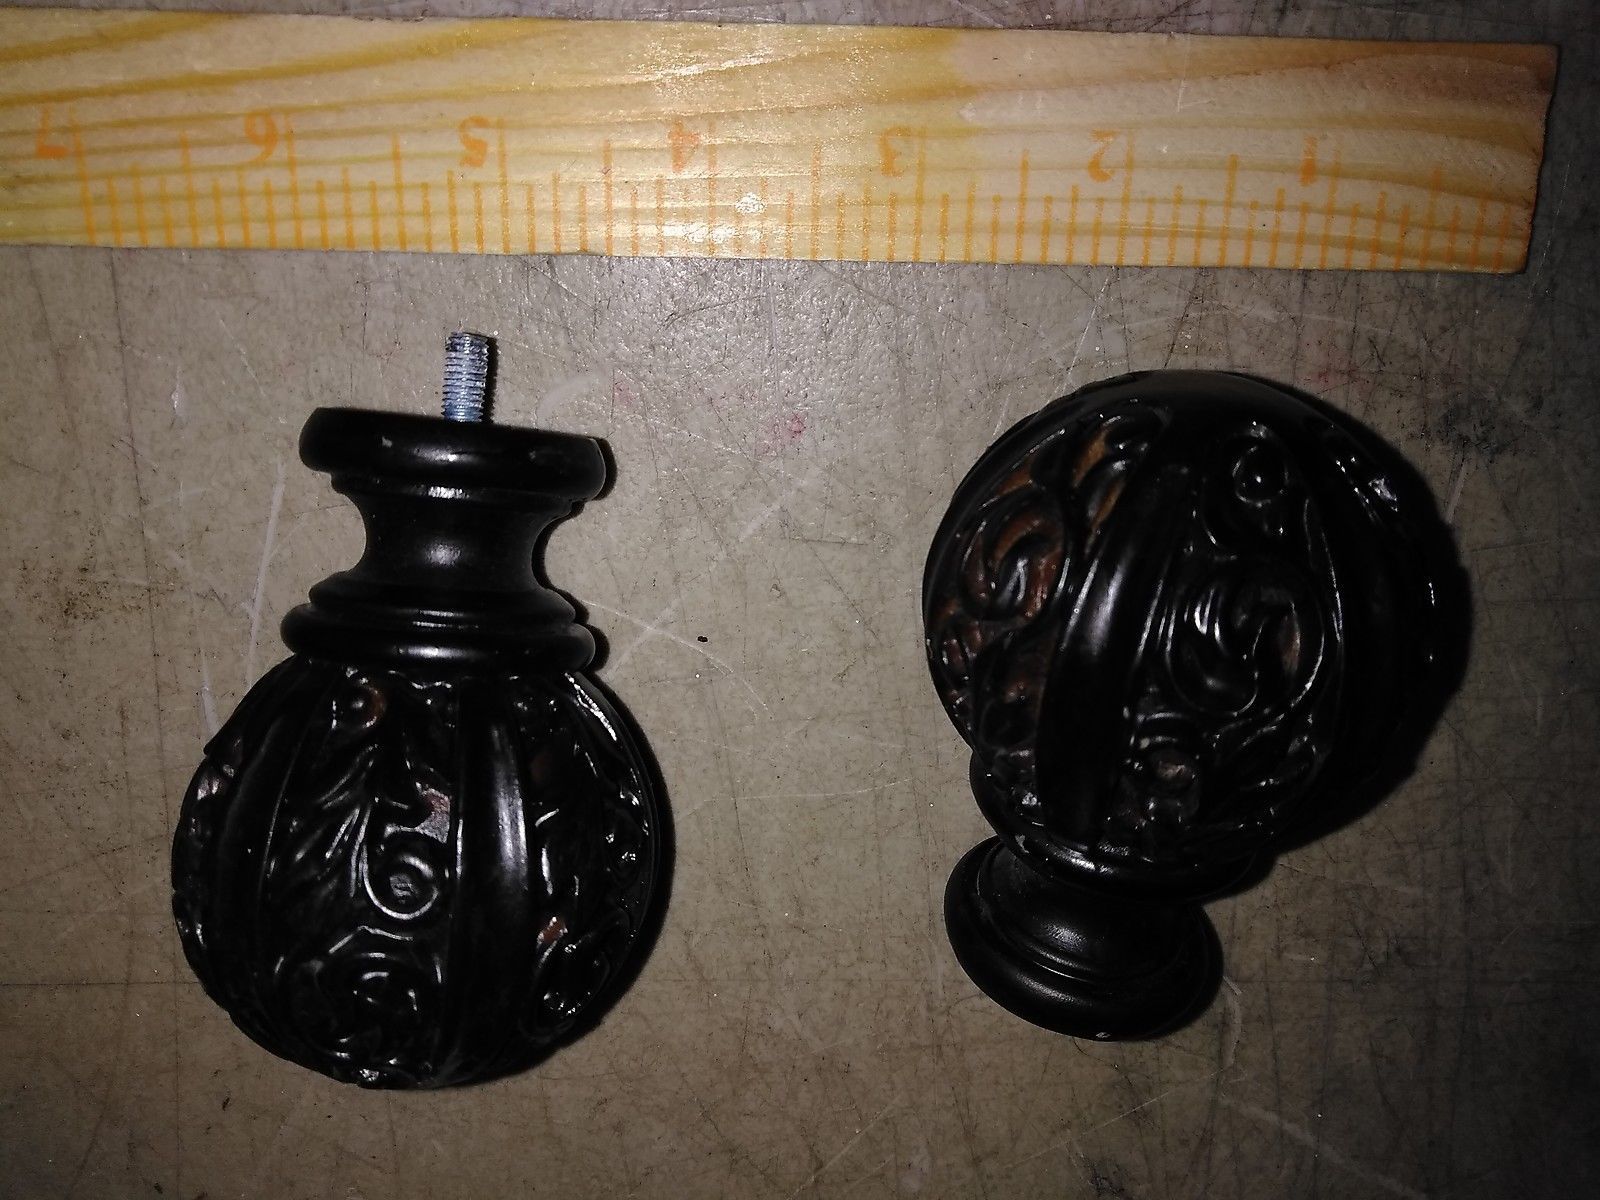 8BB86 PAIR OF "CARVED" BALL FINIALS, 2" +/- SPHERE, #10NF +/- THREADS, VERY GOOD - $6.79